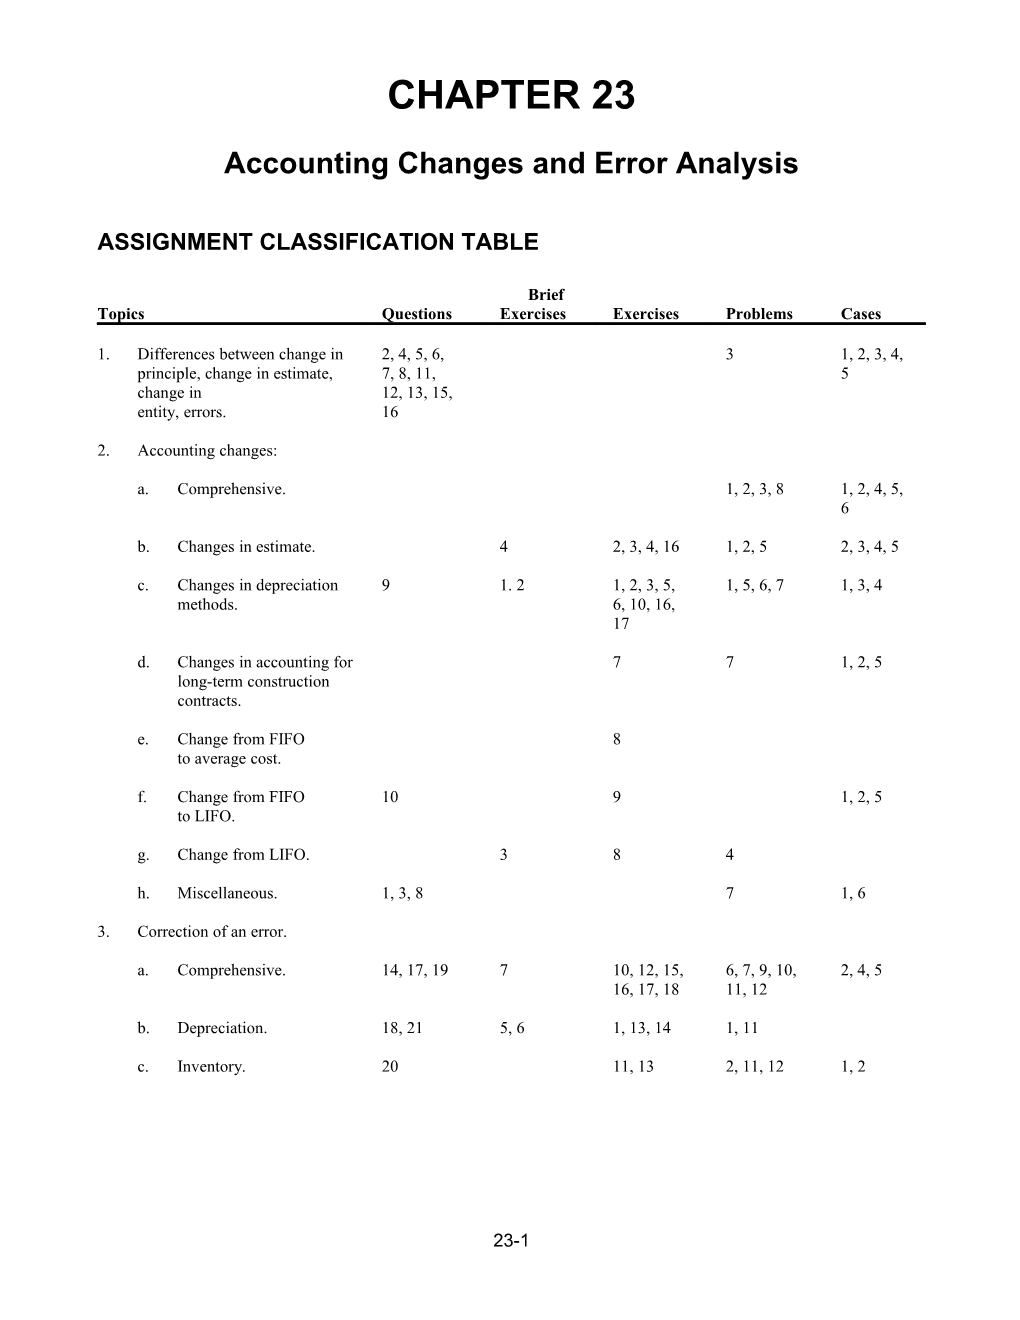 Accounting Changes and Error Analysis s1